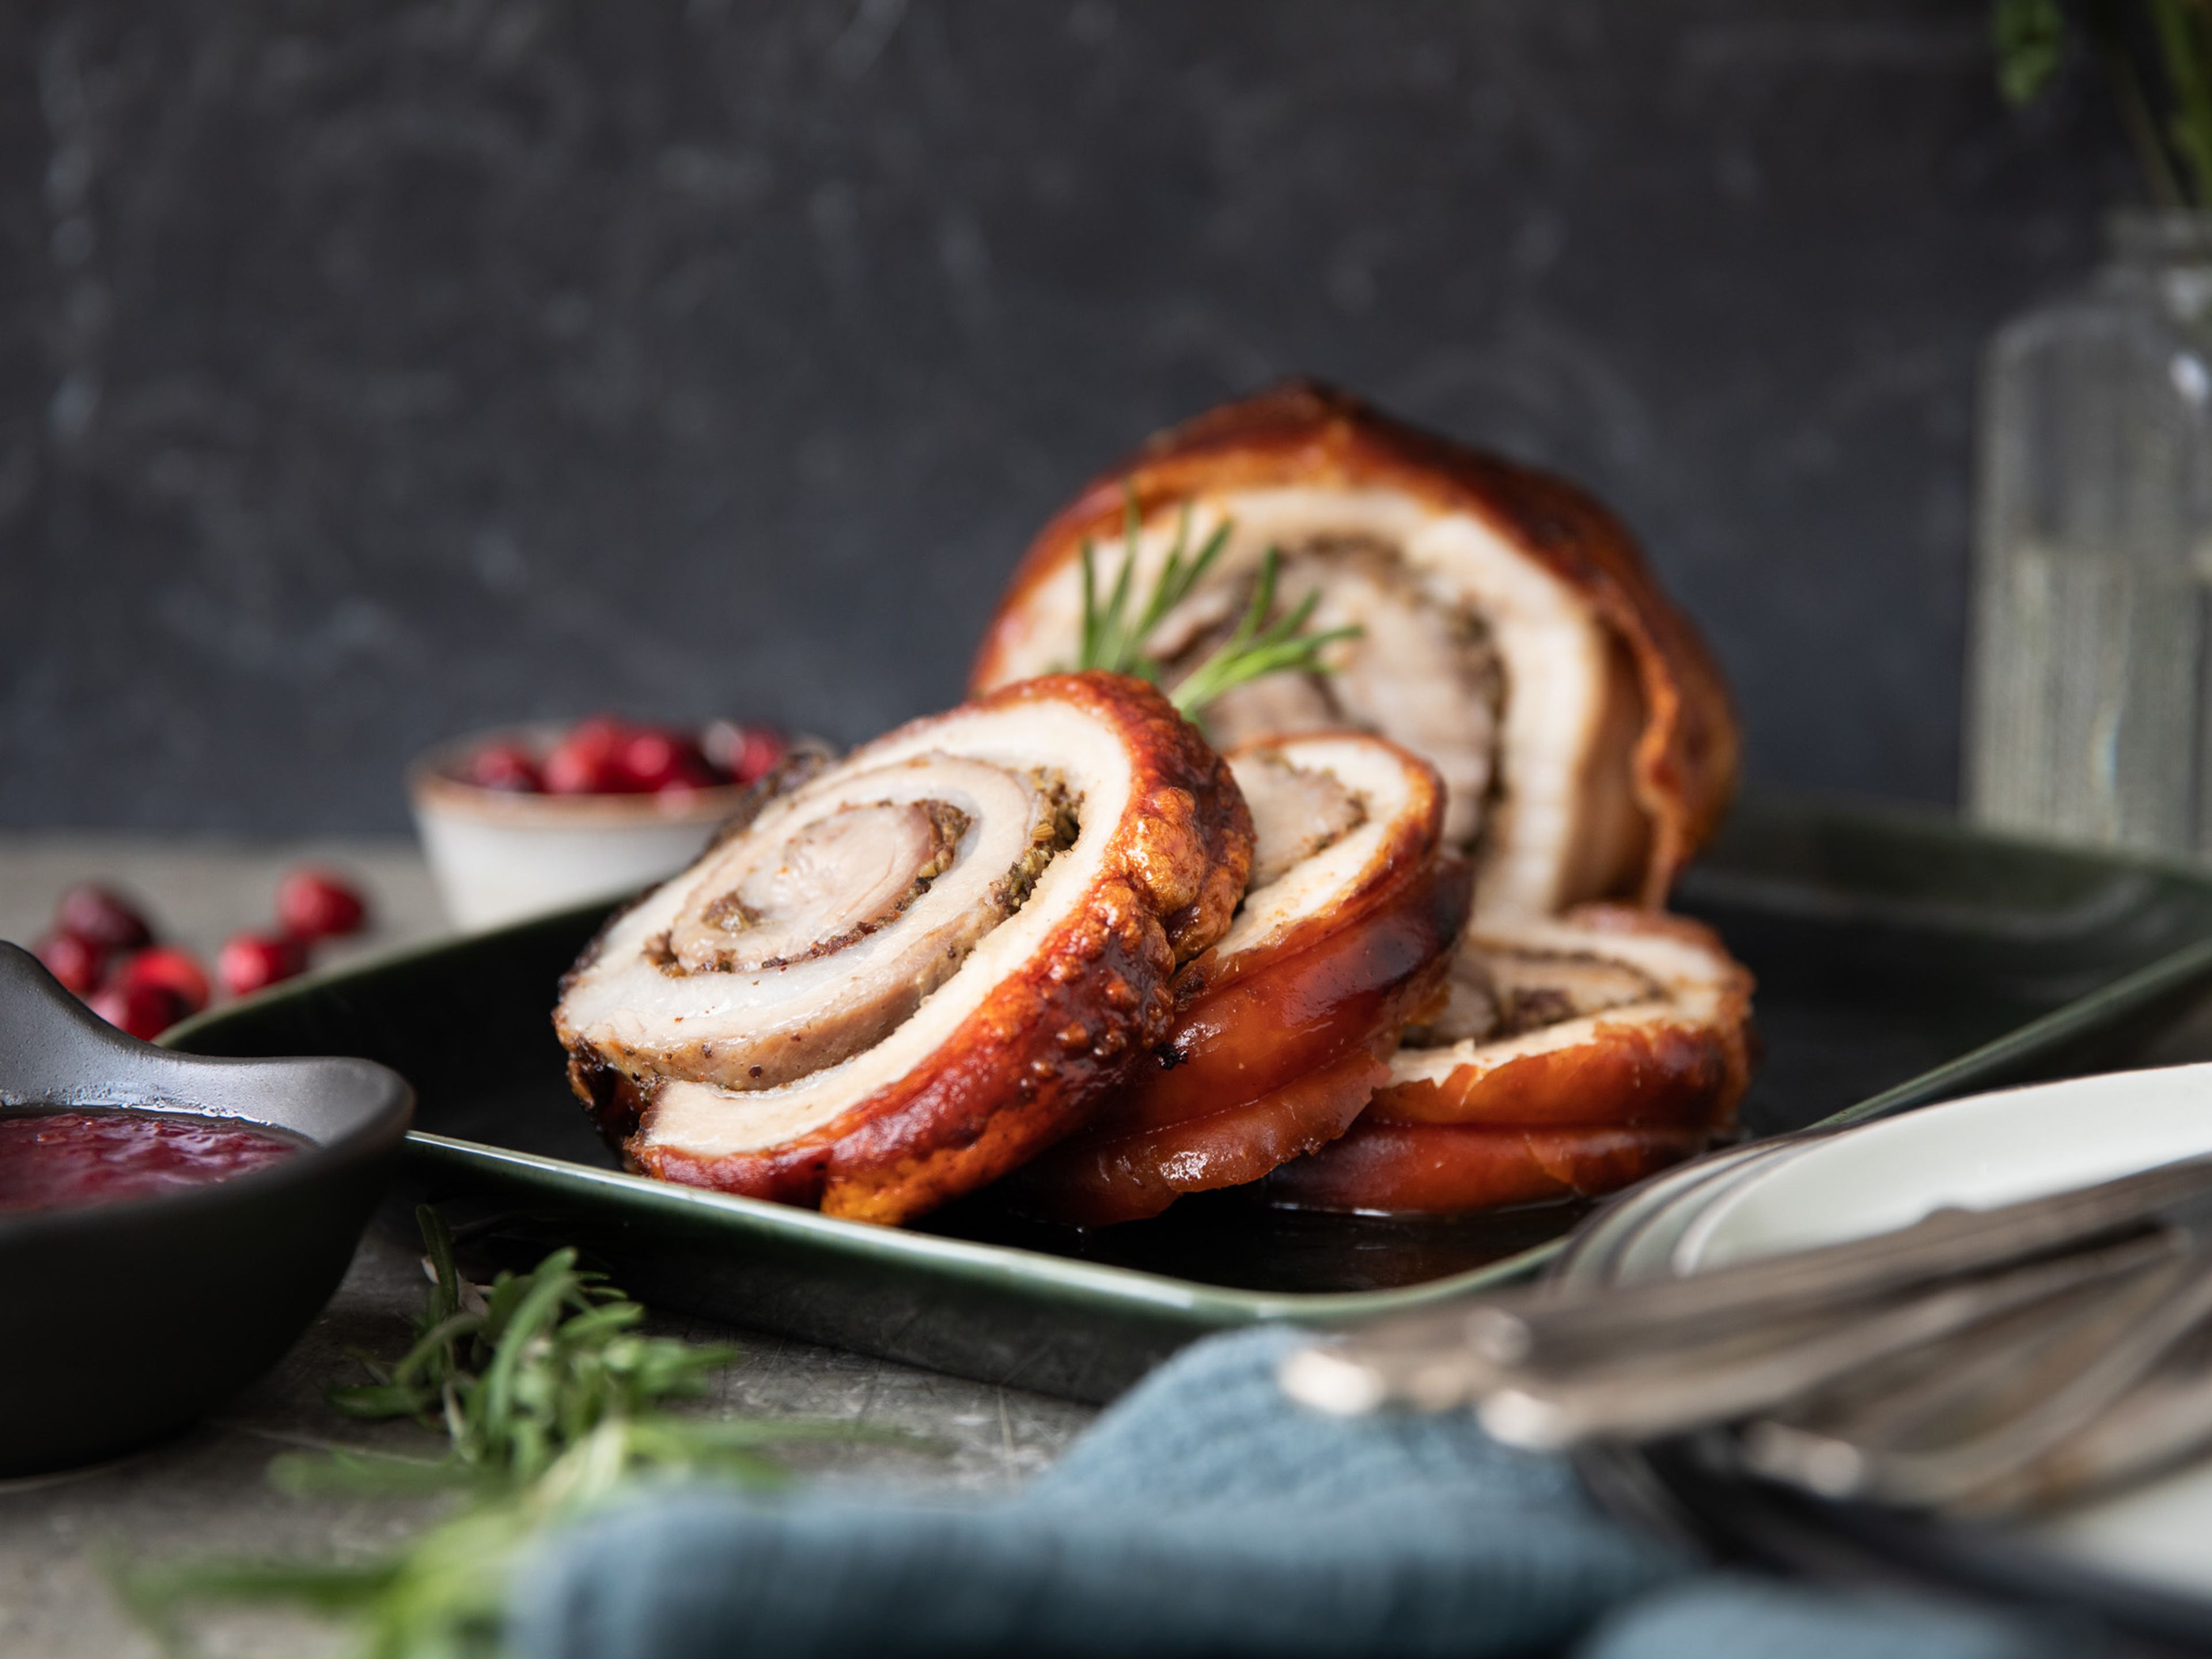 Crispy rolled pork belly with cranberries and herbs